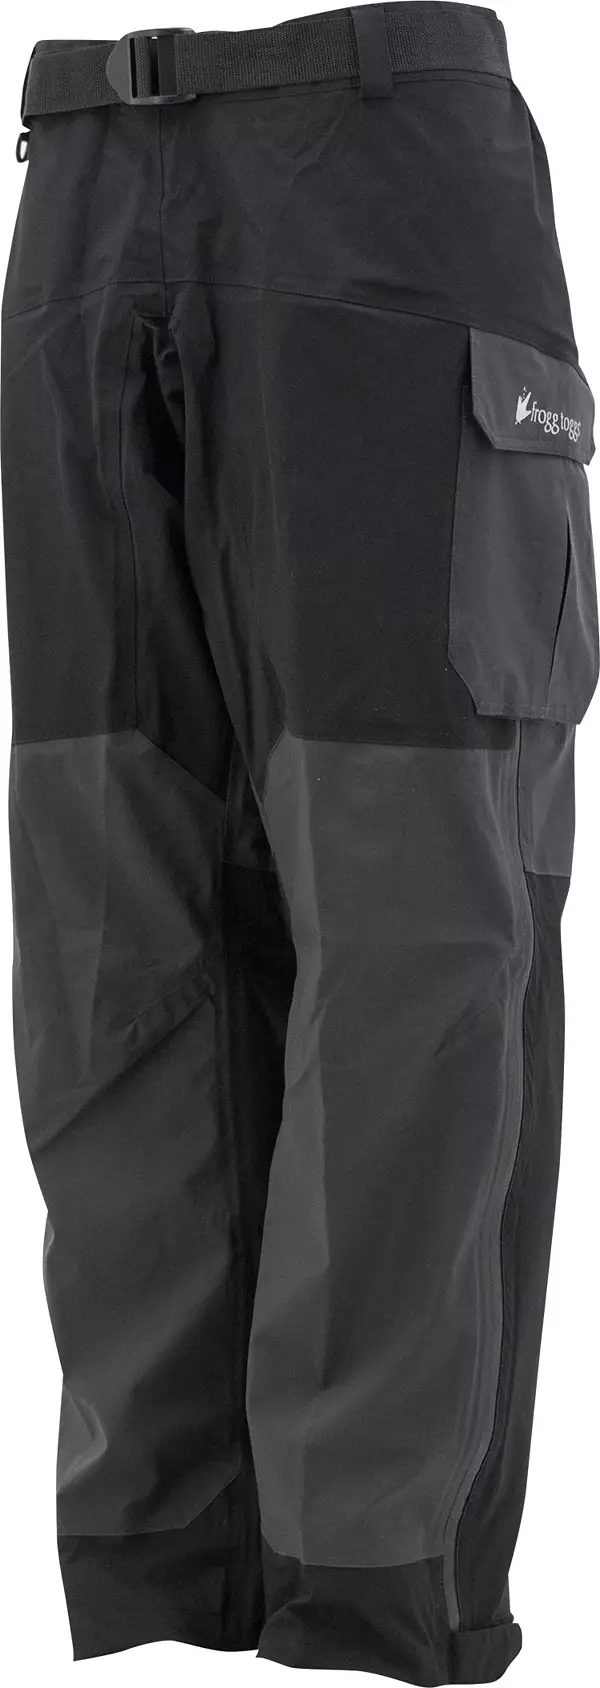 Frogg Toggs Pilot II Breathable Stocking Foot Guide Pants 2xl